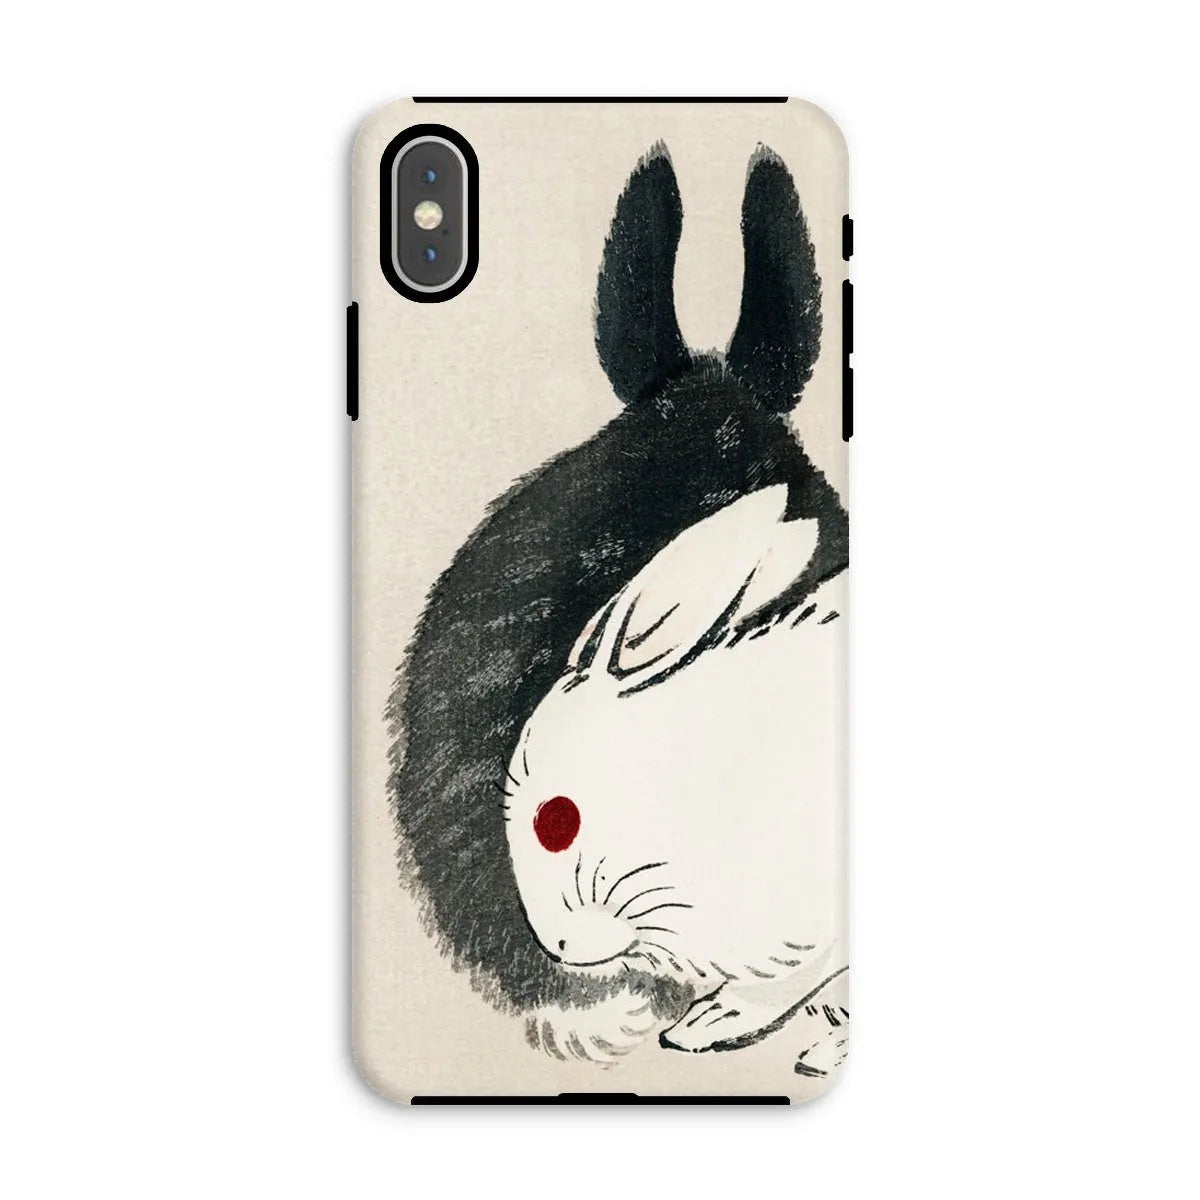 Rabbits - Black And White Meiji Art Phone Case - Kōno Bairei - Iphone Xs Max / Matte - Mobile Phone Cases - Aesthetic